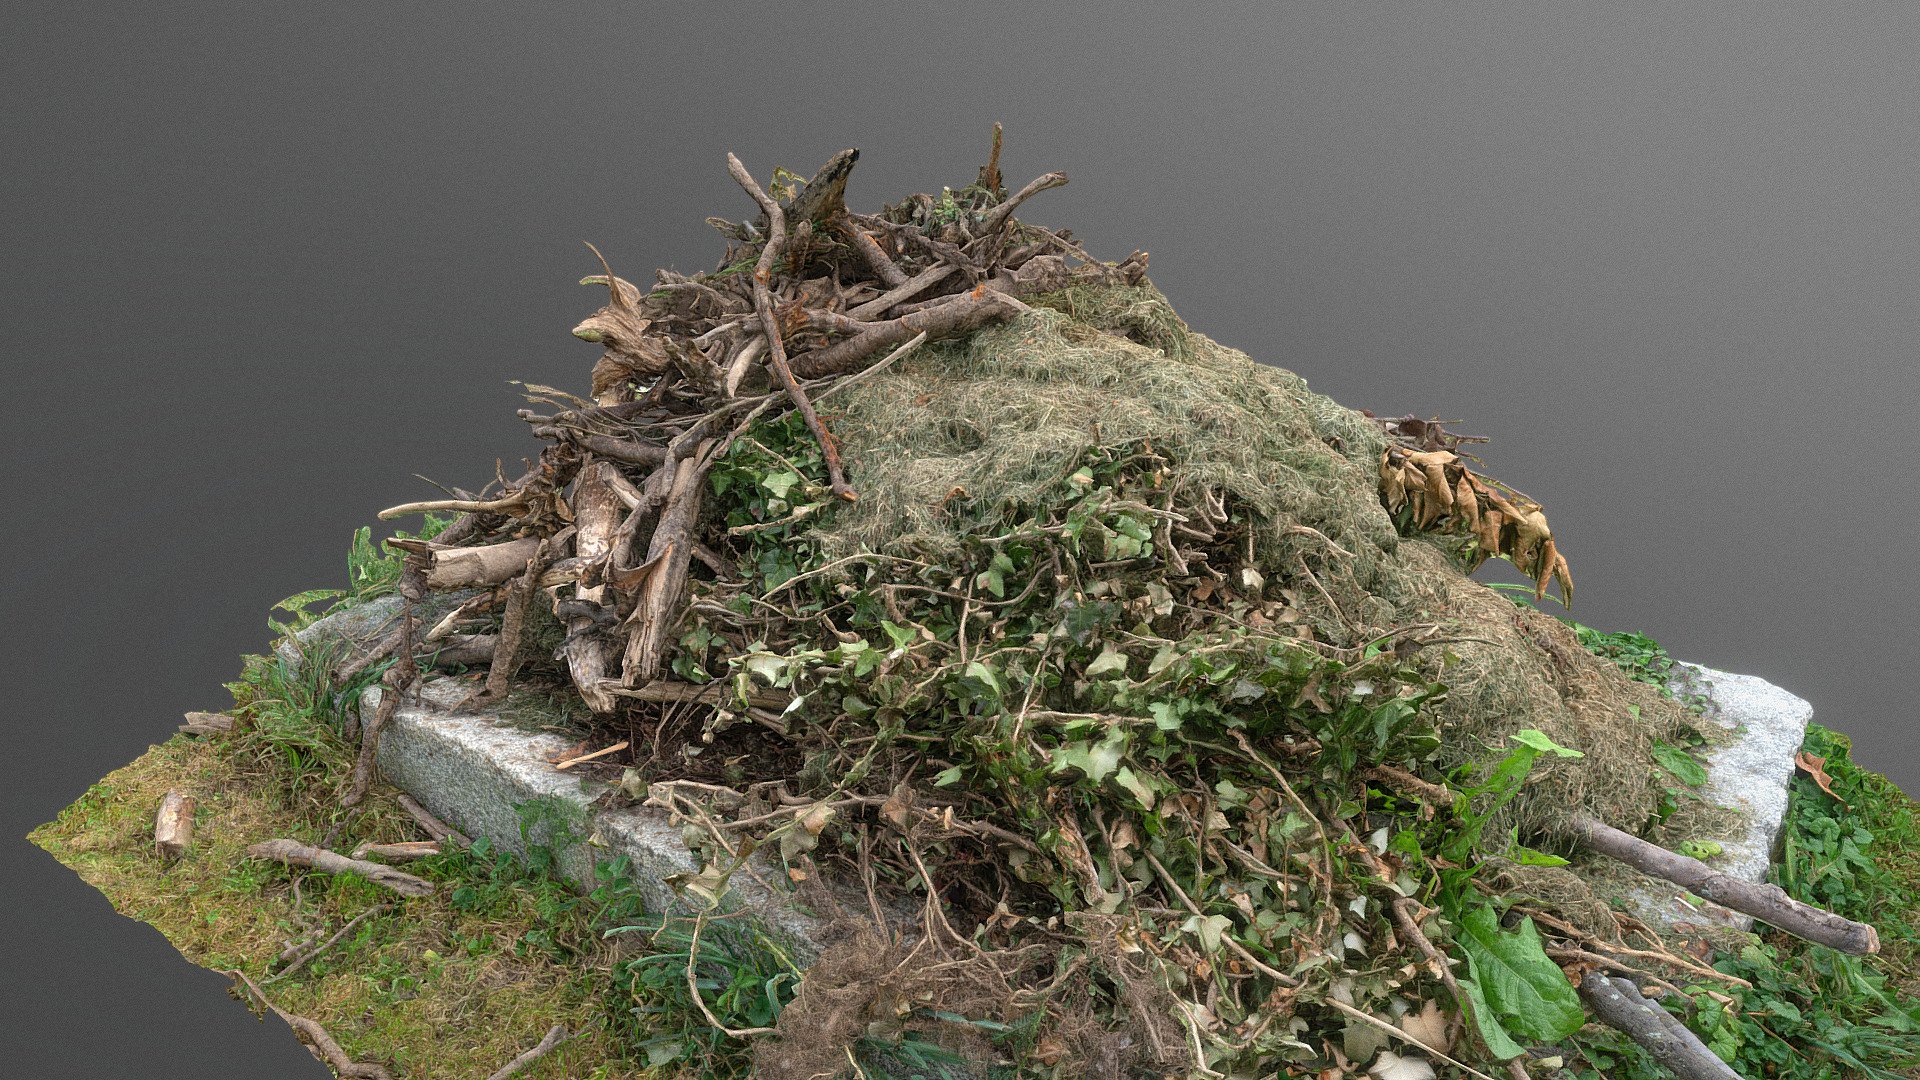 Cut branches grass campfire fire firepit heap pile mound, burning garden natural waste leftover material

photogrammetry scan (150x24mp), 3x16k textures +HD normals - Cut branches grass campfire - Download Free 3D model by matousekfoto 3d model